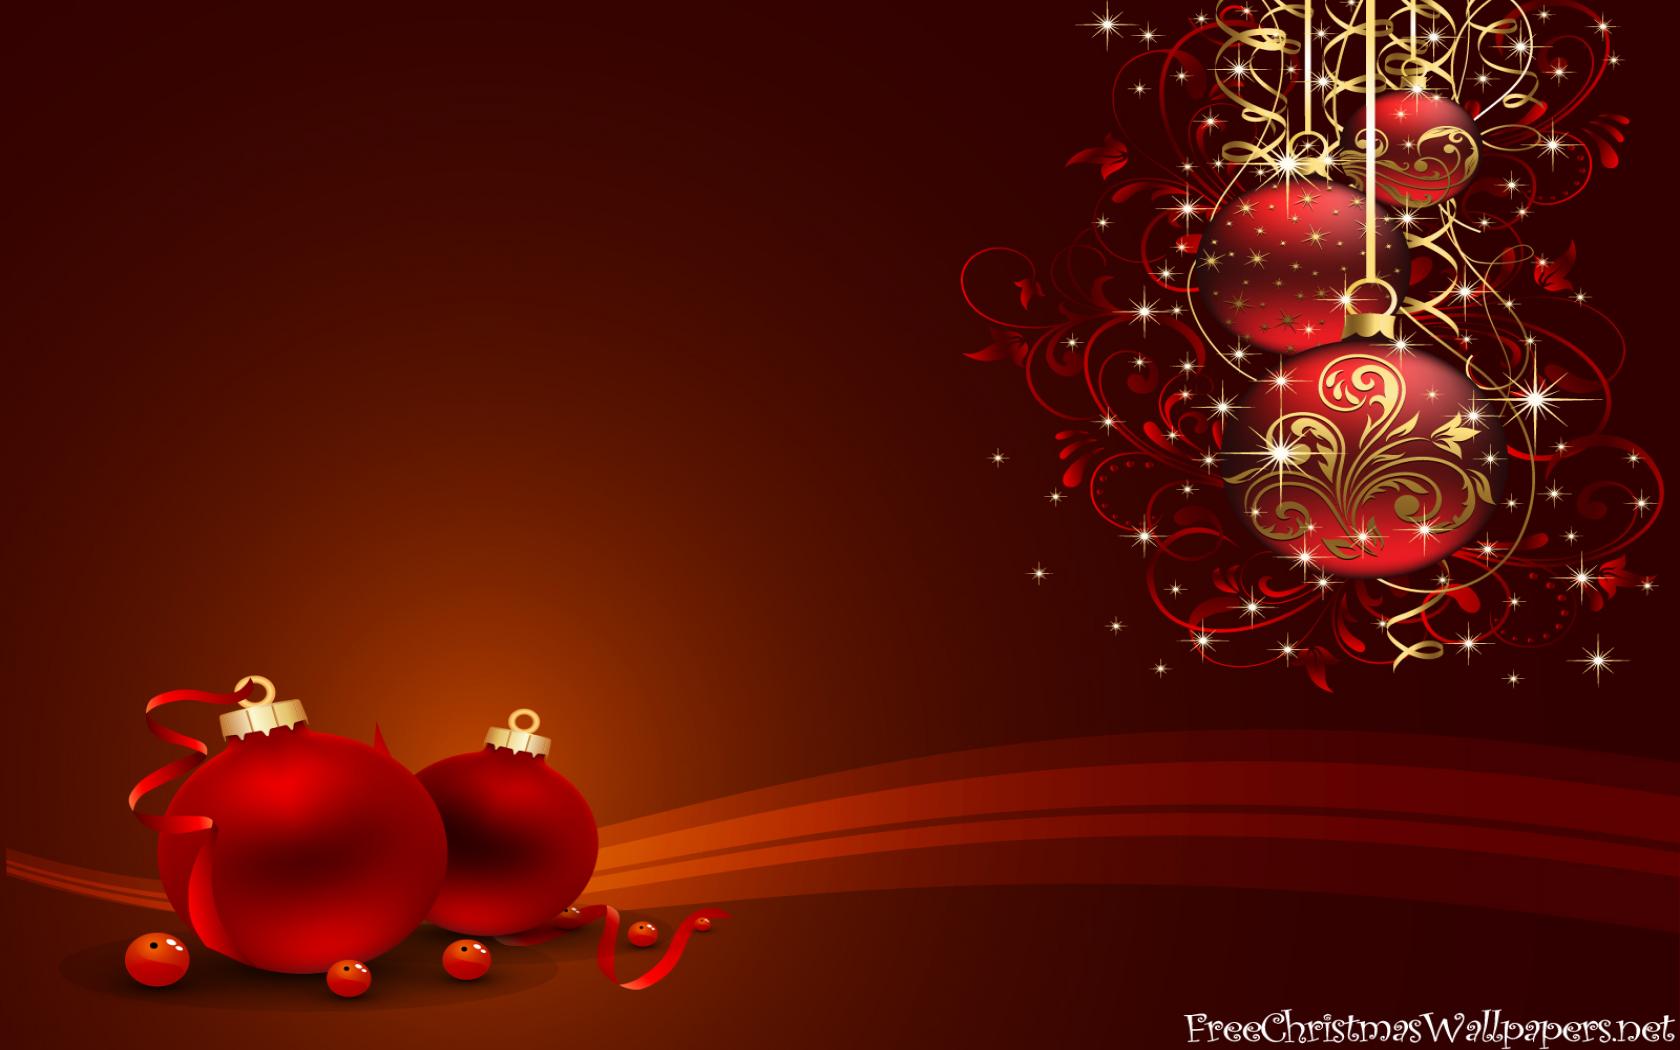 After Christmas HD Wallpapers 1680x1050 Christmas Wallpapers 1680x1050